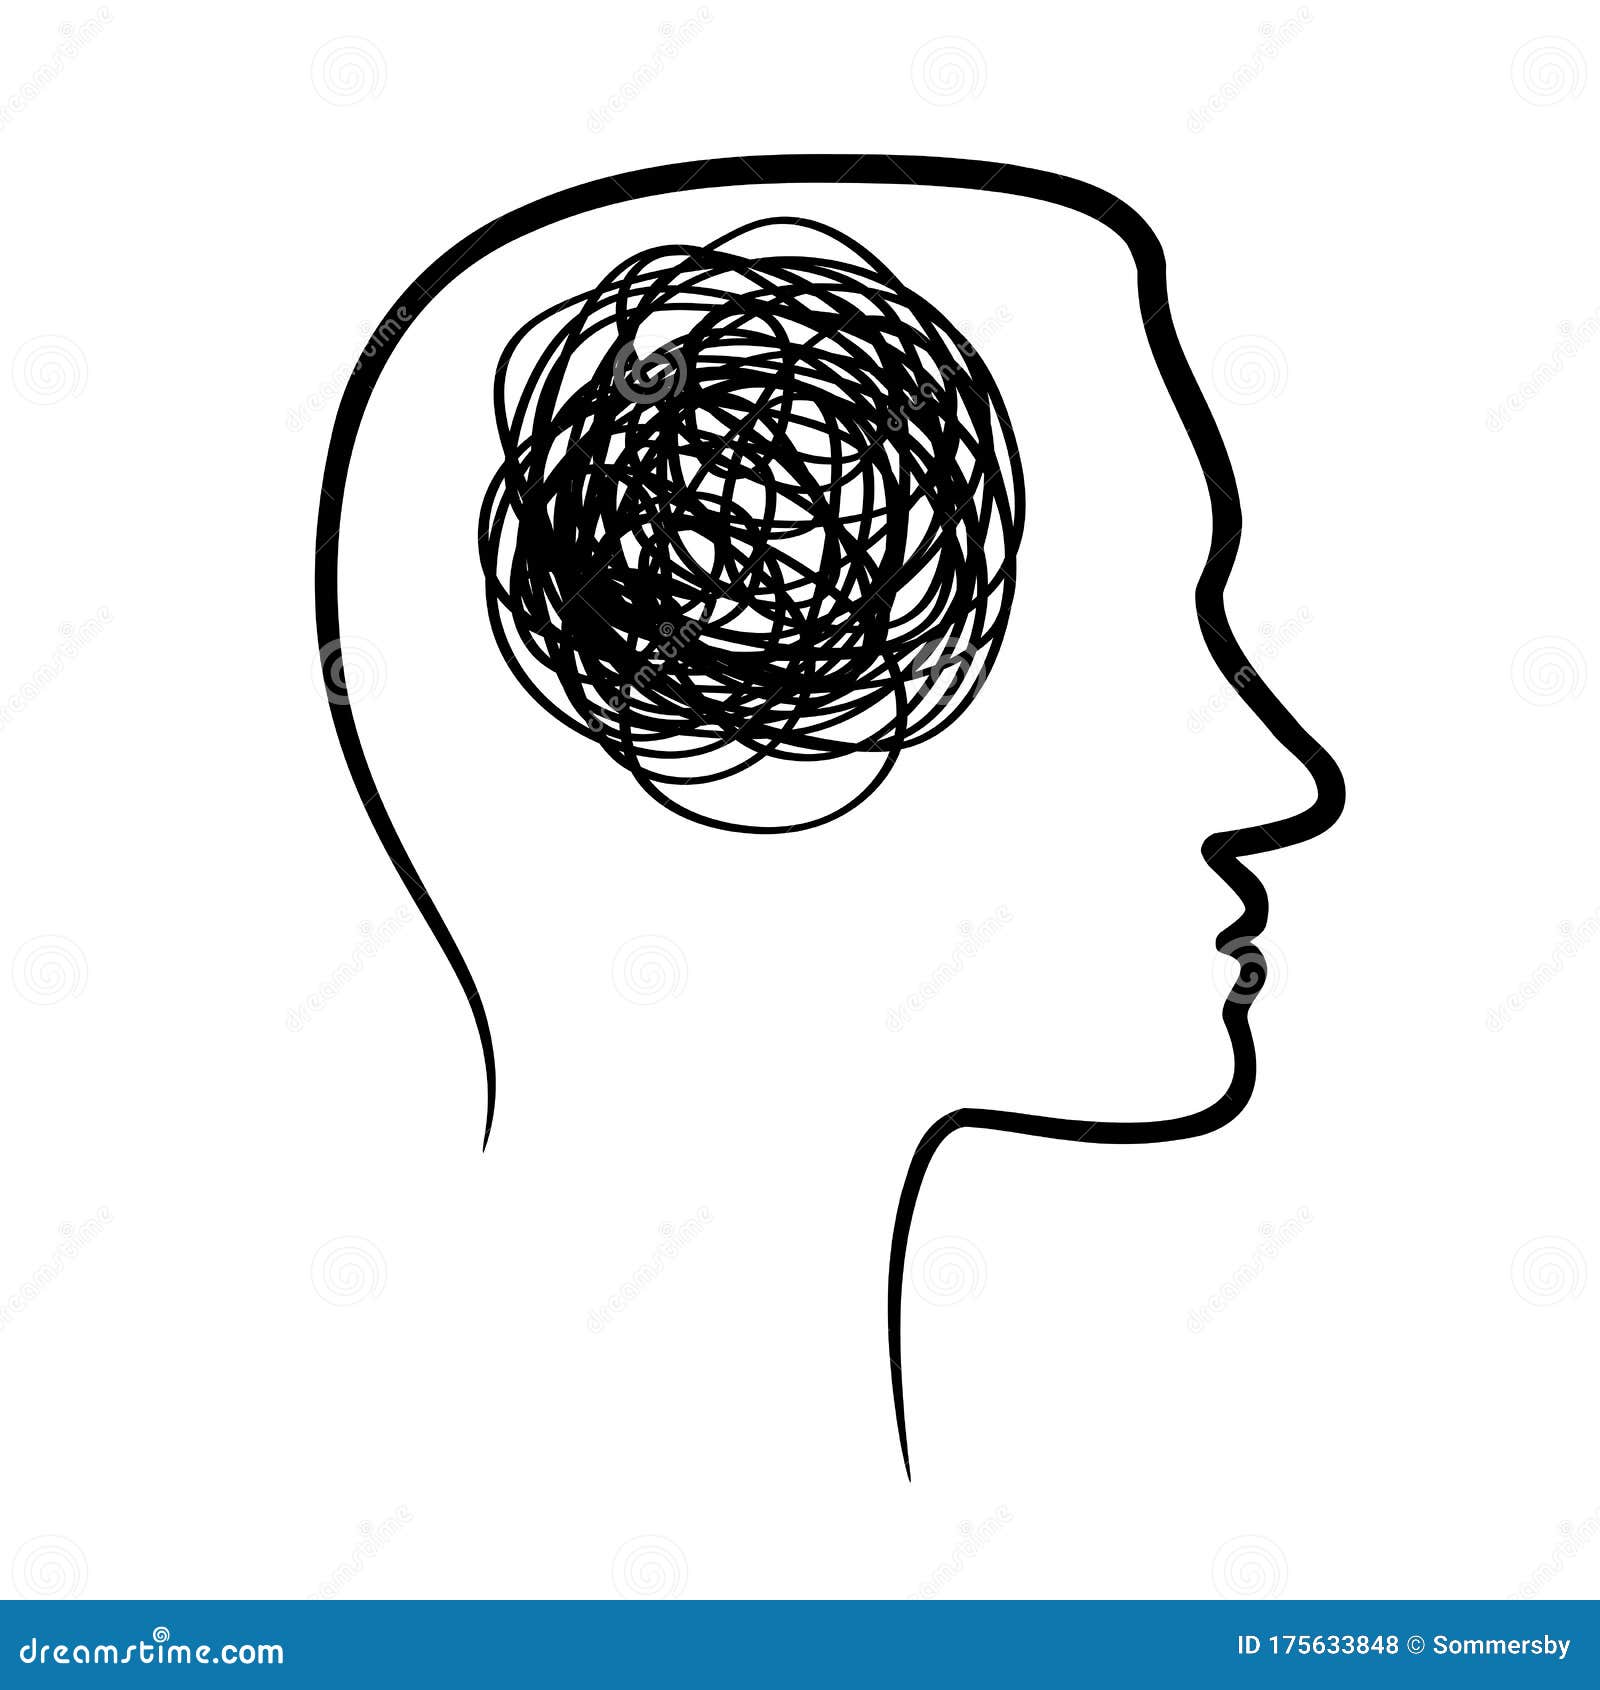 Silhouette of Huan Head with Tangled Line Inside, Like Brain. Concept ...